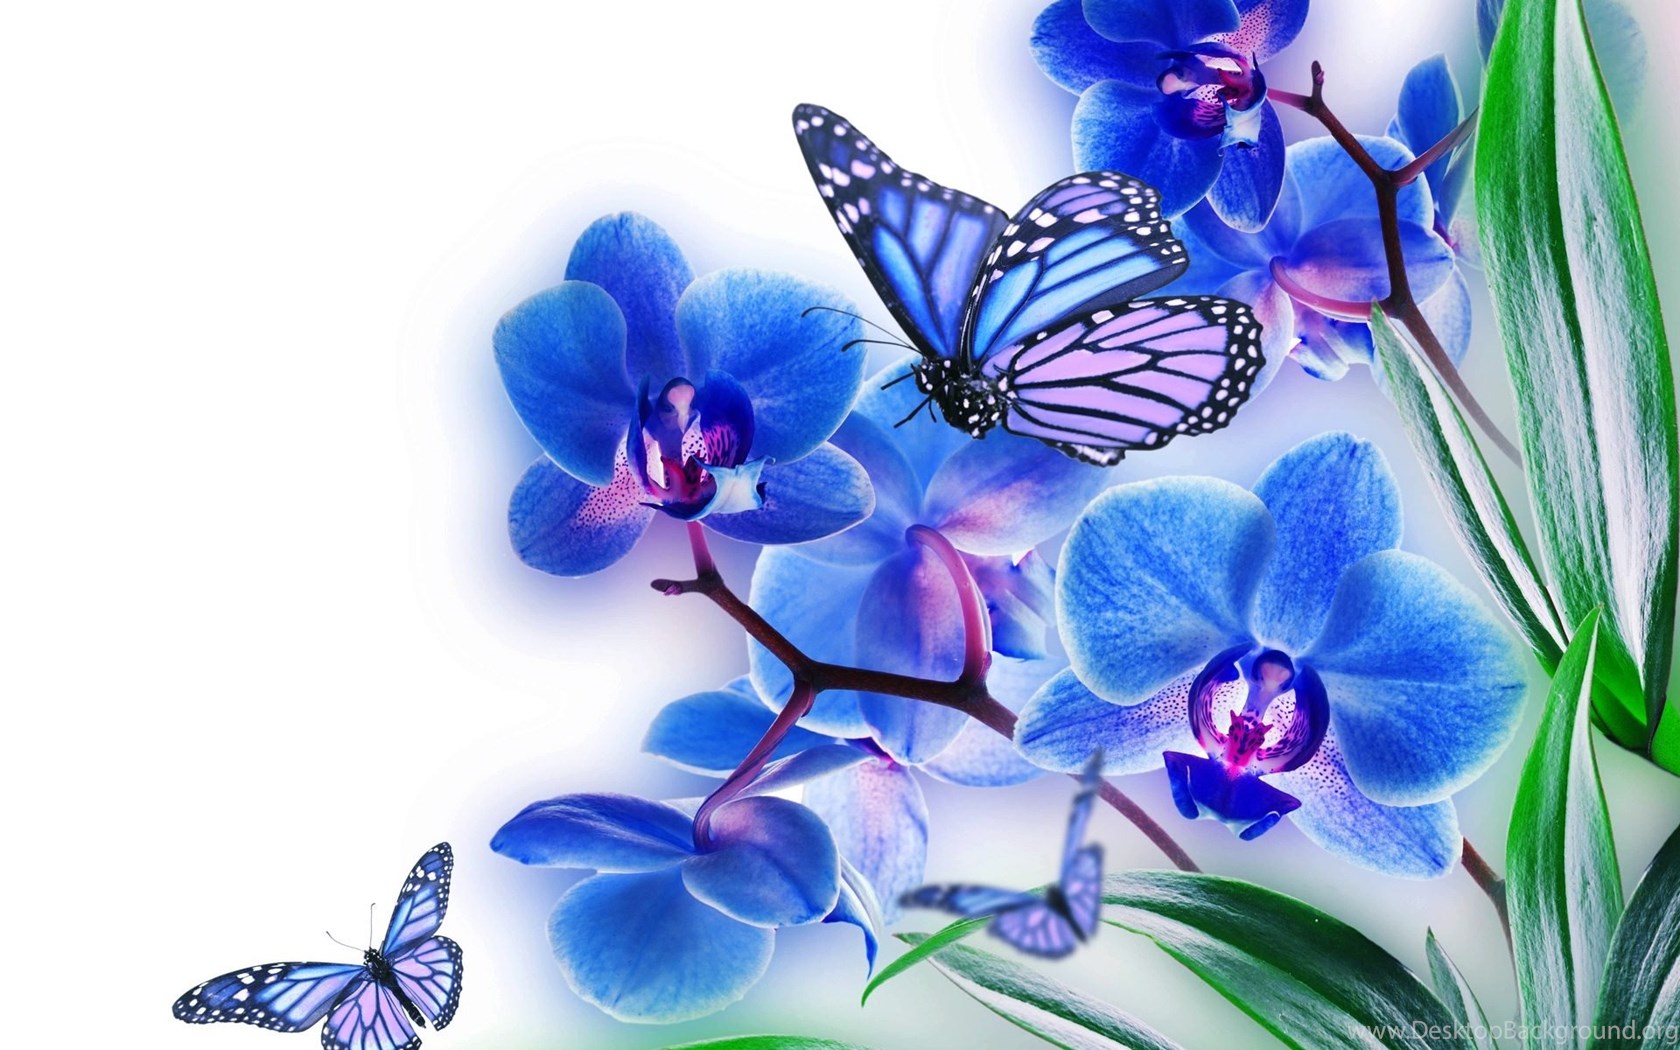 Download Wallpapers Hd Butterfly Blue Flowers With ...